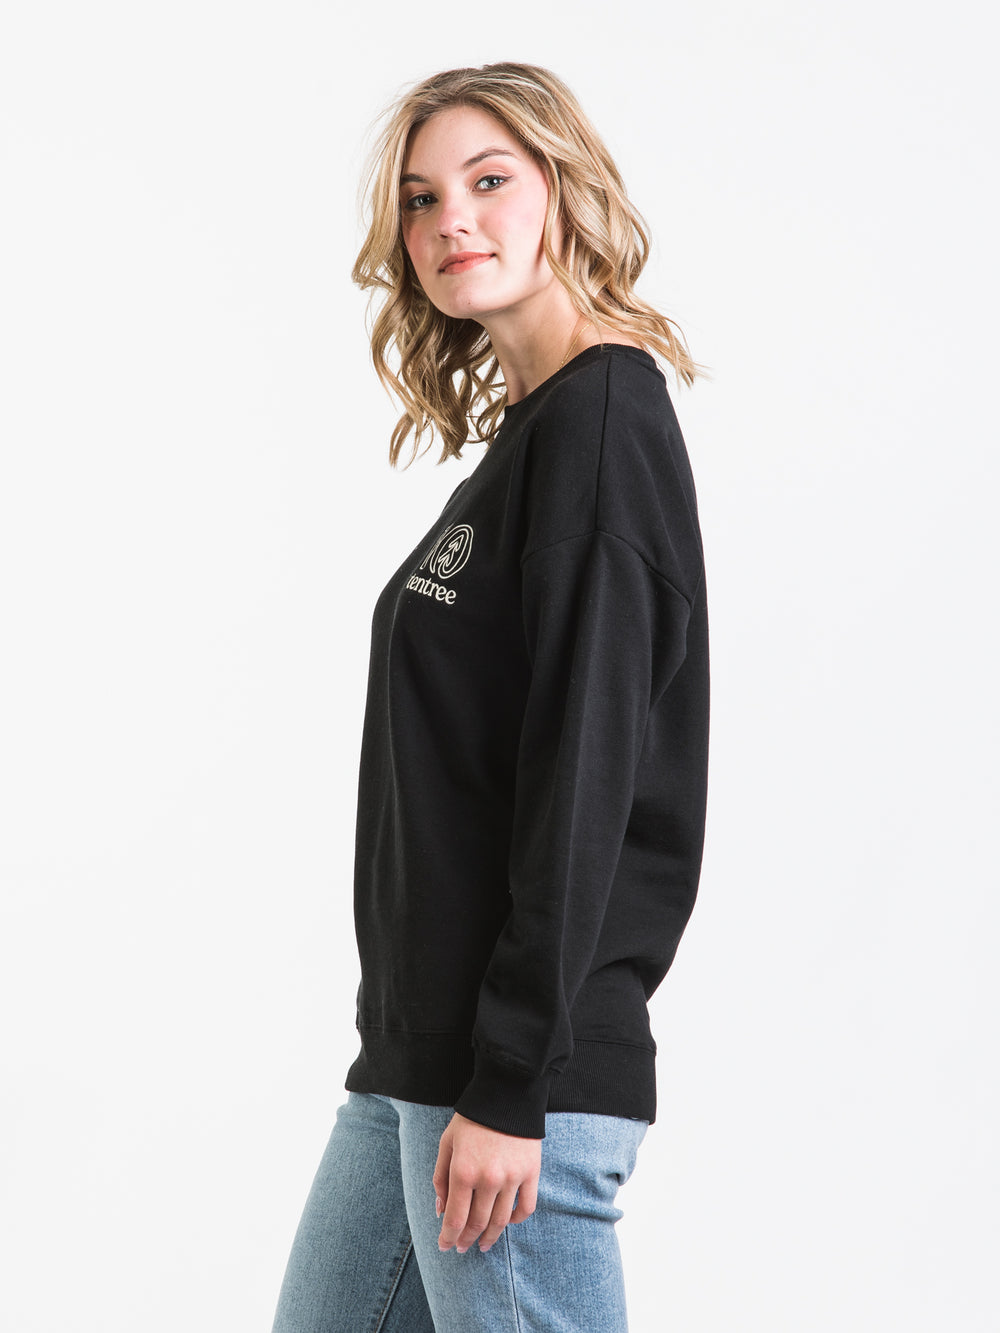 TENTREE EMBROIDERED LOGO OUTLINE OVERSIZED CREWNECK SWEATER - CLEARANCE